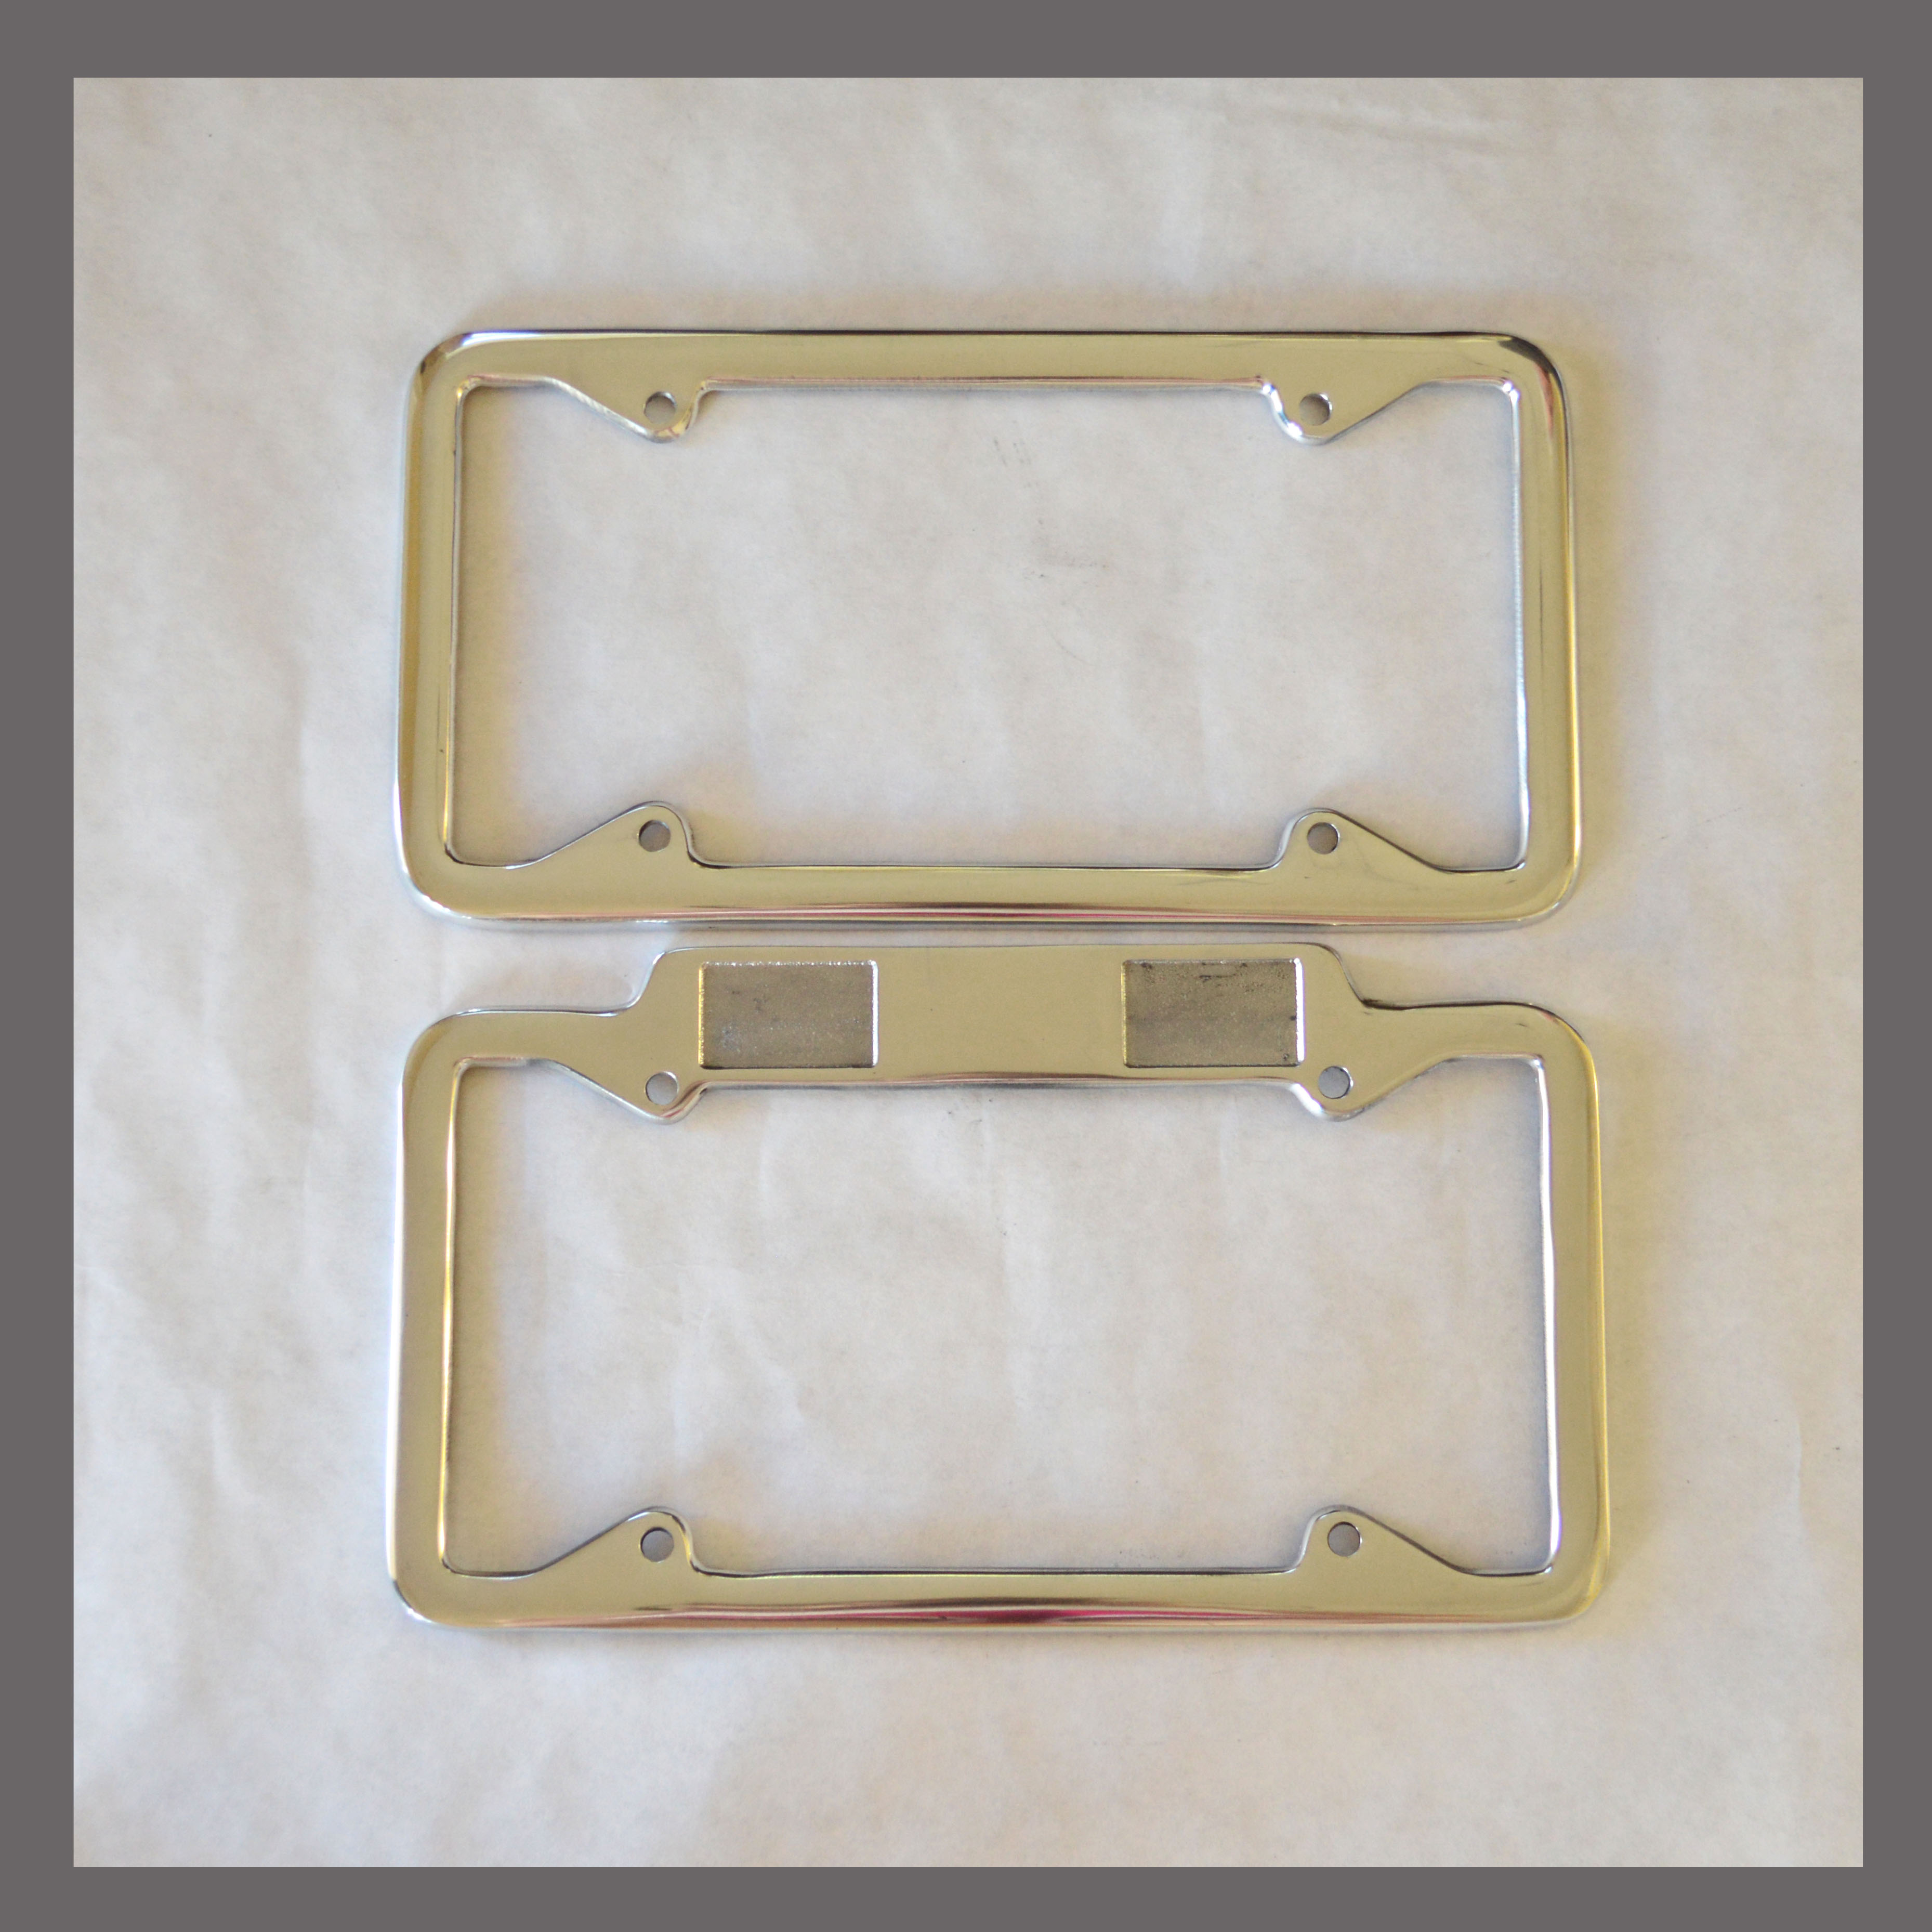 NEW PAIR OF 1940 TO 1955 VINTAGE STYLE CALIFORNIA LICENSE PLATE FRAMES ! 